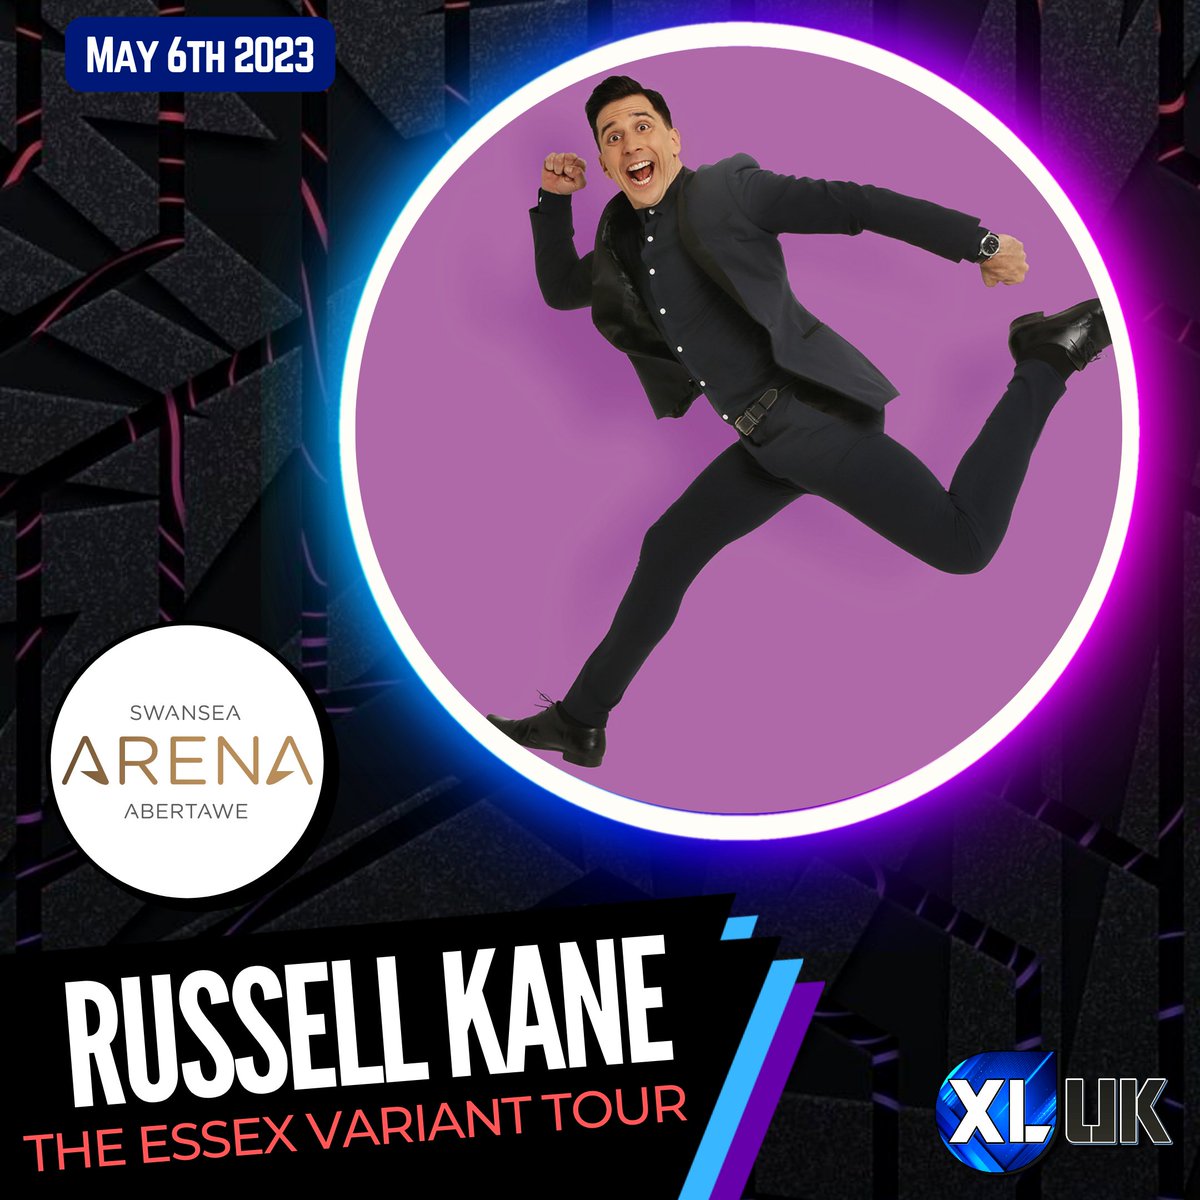 Russell Kane is coming to South Wales & bringing to town is his own gut-punch & searingly funny award-winning take on the two years we’ve just gone through.

xlukradio.com | App | DAB | Streaming 🔊

#xlukradio #swanseaarena #russellkane #comedytour #theessexvariant